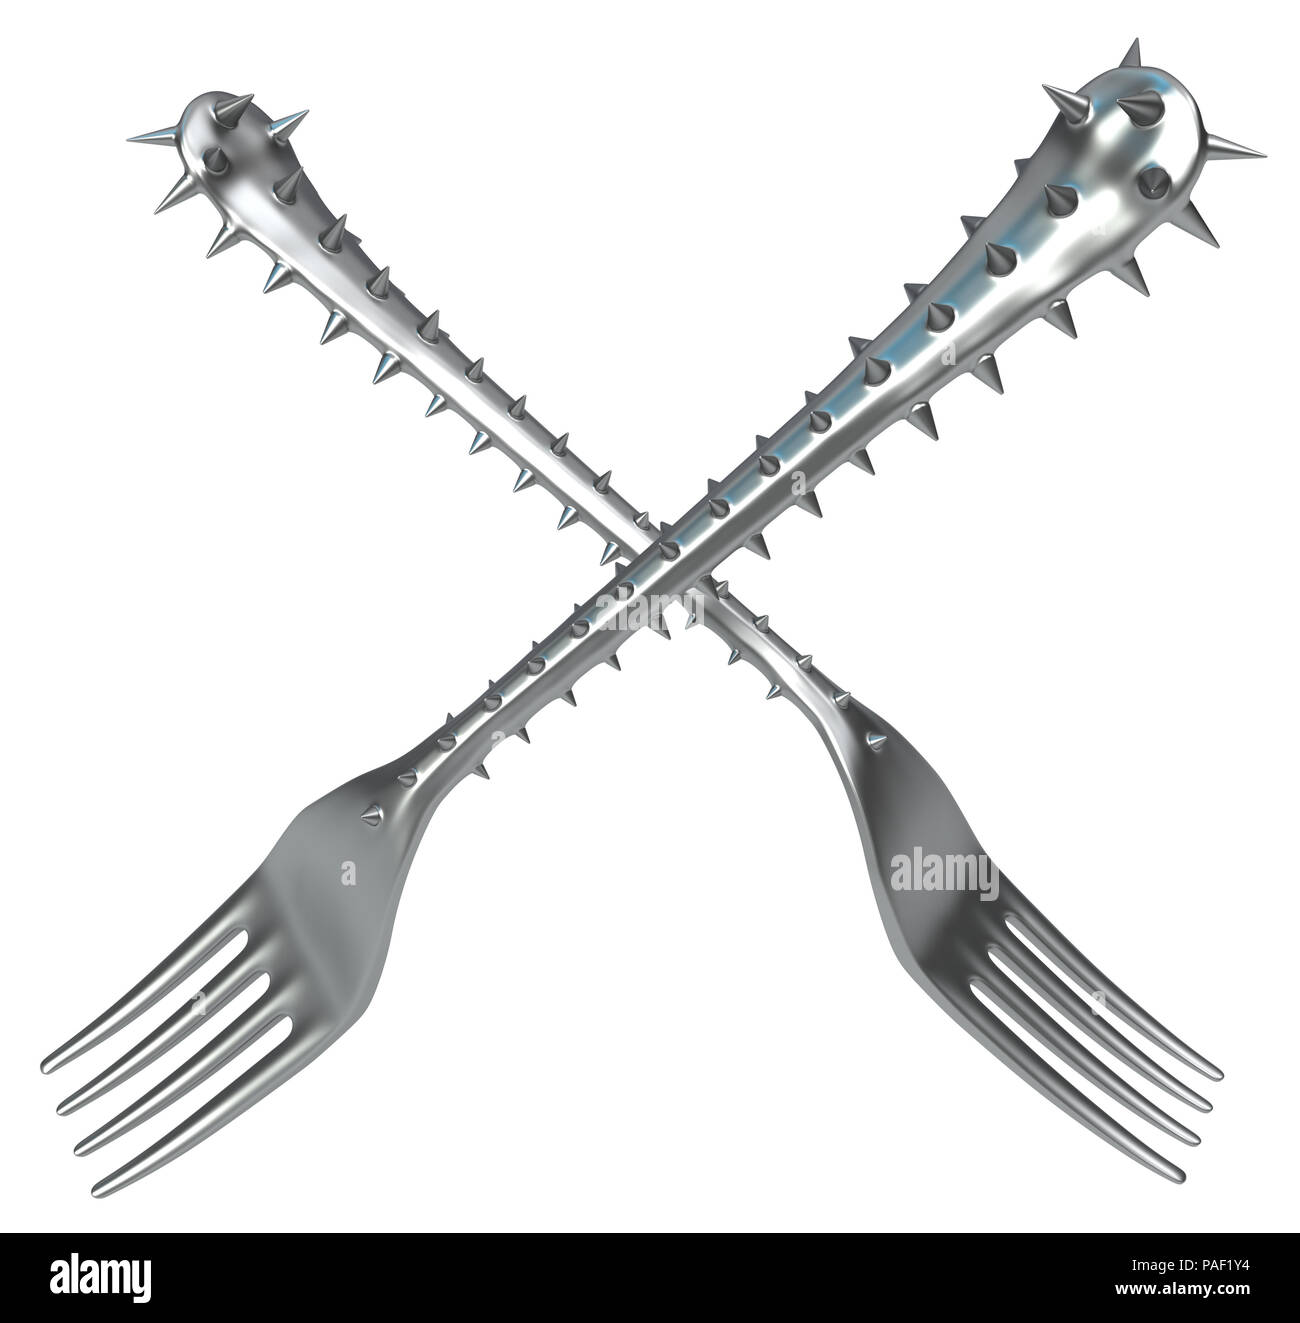 Forks handle covered in sharp spikes, metaphor 3d illustration, horizontal, isolated, over white Stock Photo